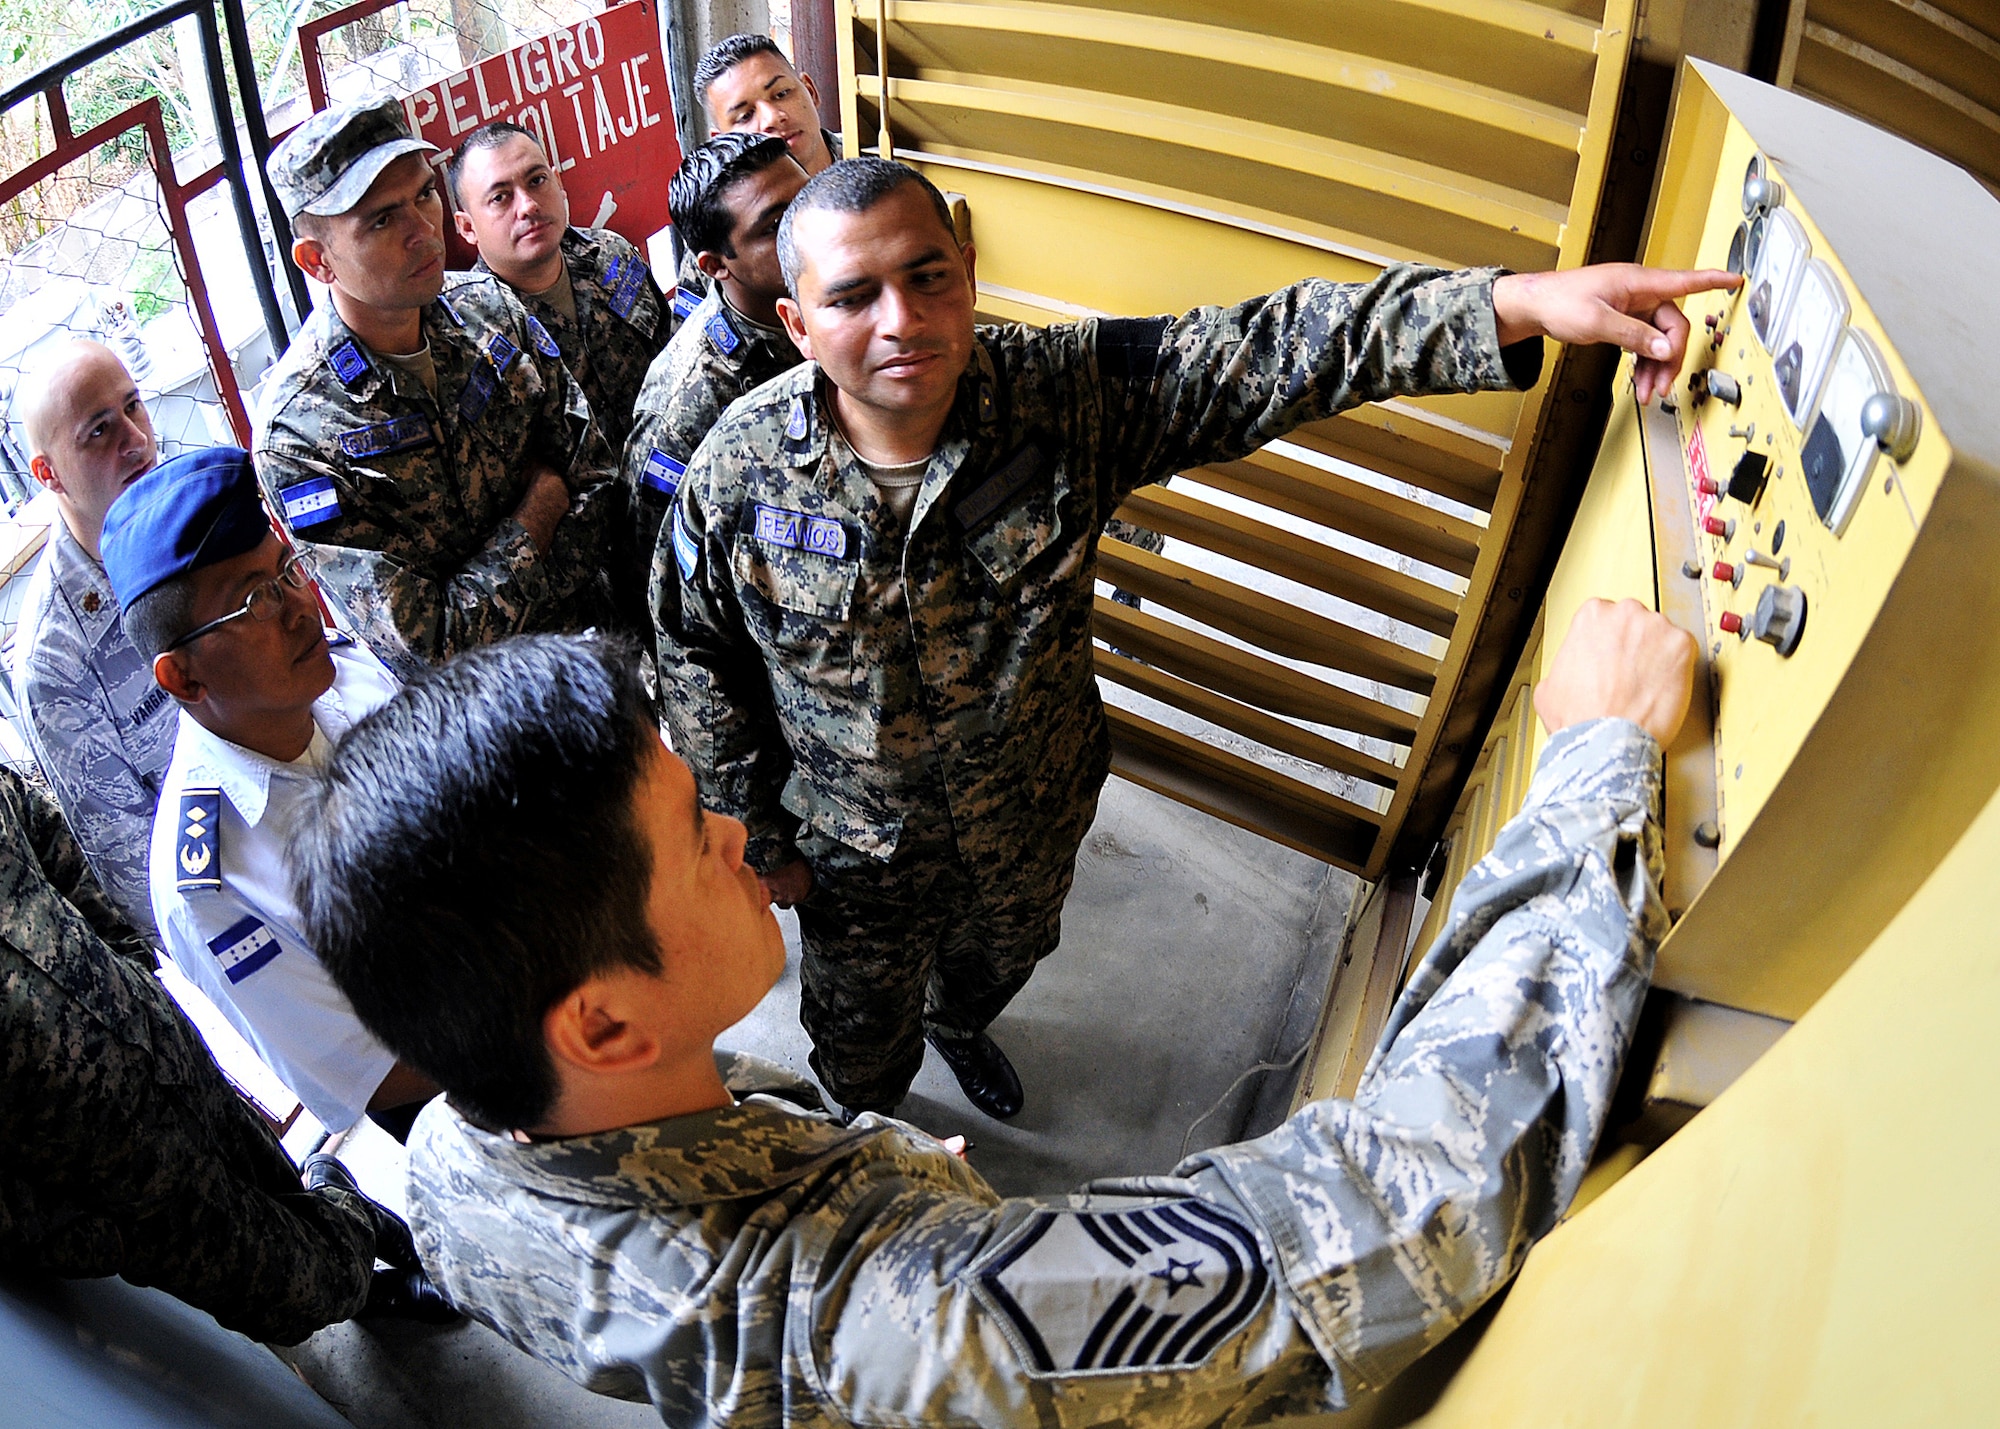 A Honduran Air Force Airman explains to Master Sgt. Ronald Hael, 571st Mobility Support Advisory Squadron power production air advisor, the function of the control gauges during the preoperational inspection on the generator at Col. Hernán Acosta Mejia Air Base, Tegucigalpa, Honduras, Feb. 13.  The Airmen, representing 15 Air Force specialties, are working side-by-side with Honduran Air Force members in developing the seven core competencies of air base defense, air traffic control, aircraft maintenance, aircrew survival, communications, generator maintenance and safety.  (U.S. Air Force photo by Tech. Sgt. Lesley Waters)